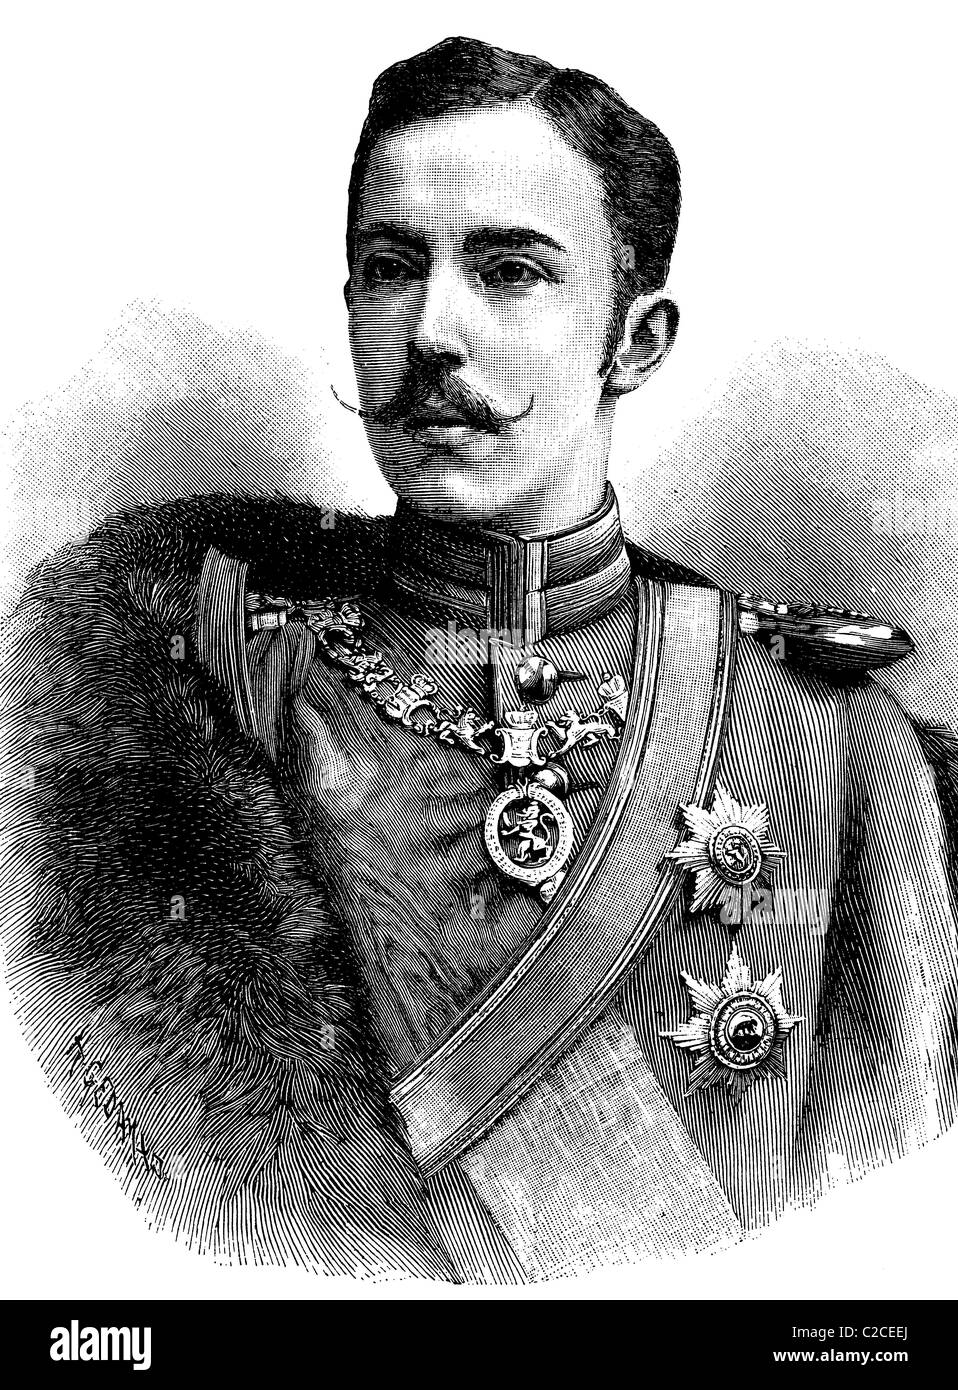 Prince Frederick Charles of Hesse, 1868 - 1940, King of Finland, historical illustration circa 1893 Stock Photo